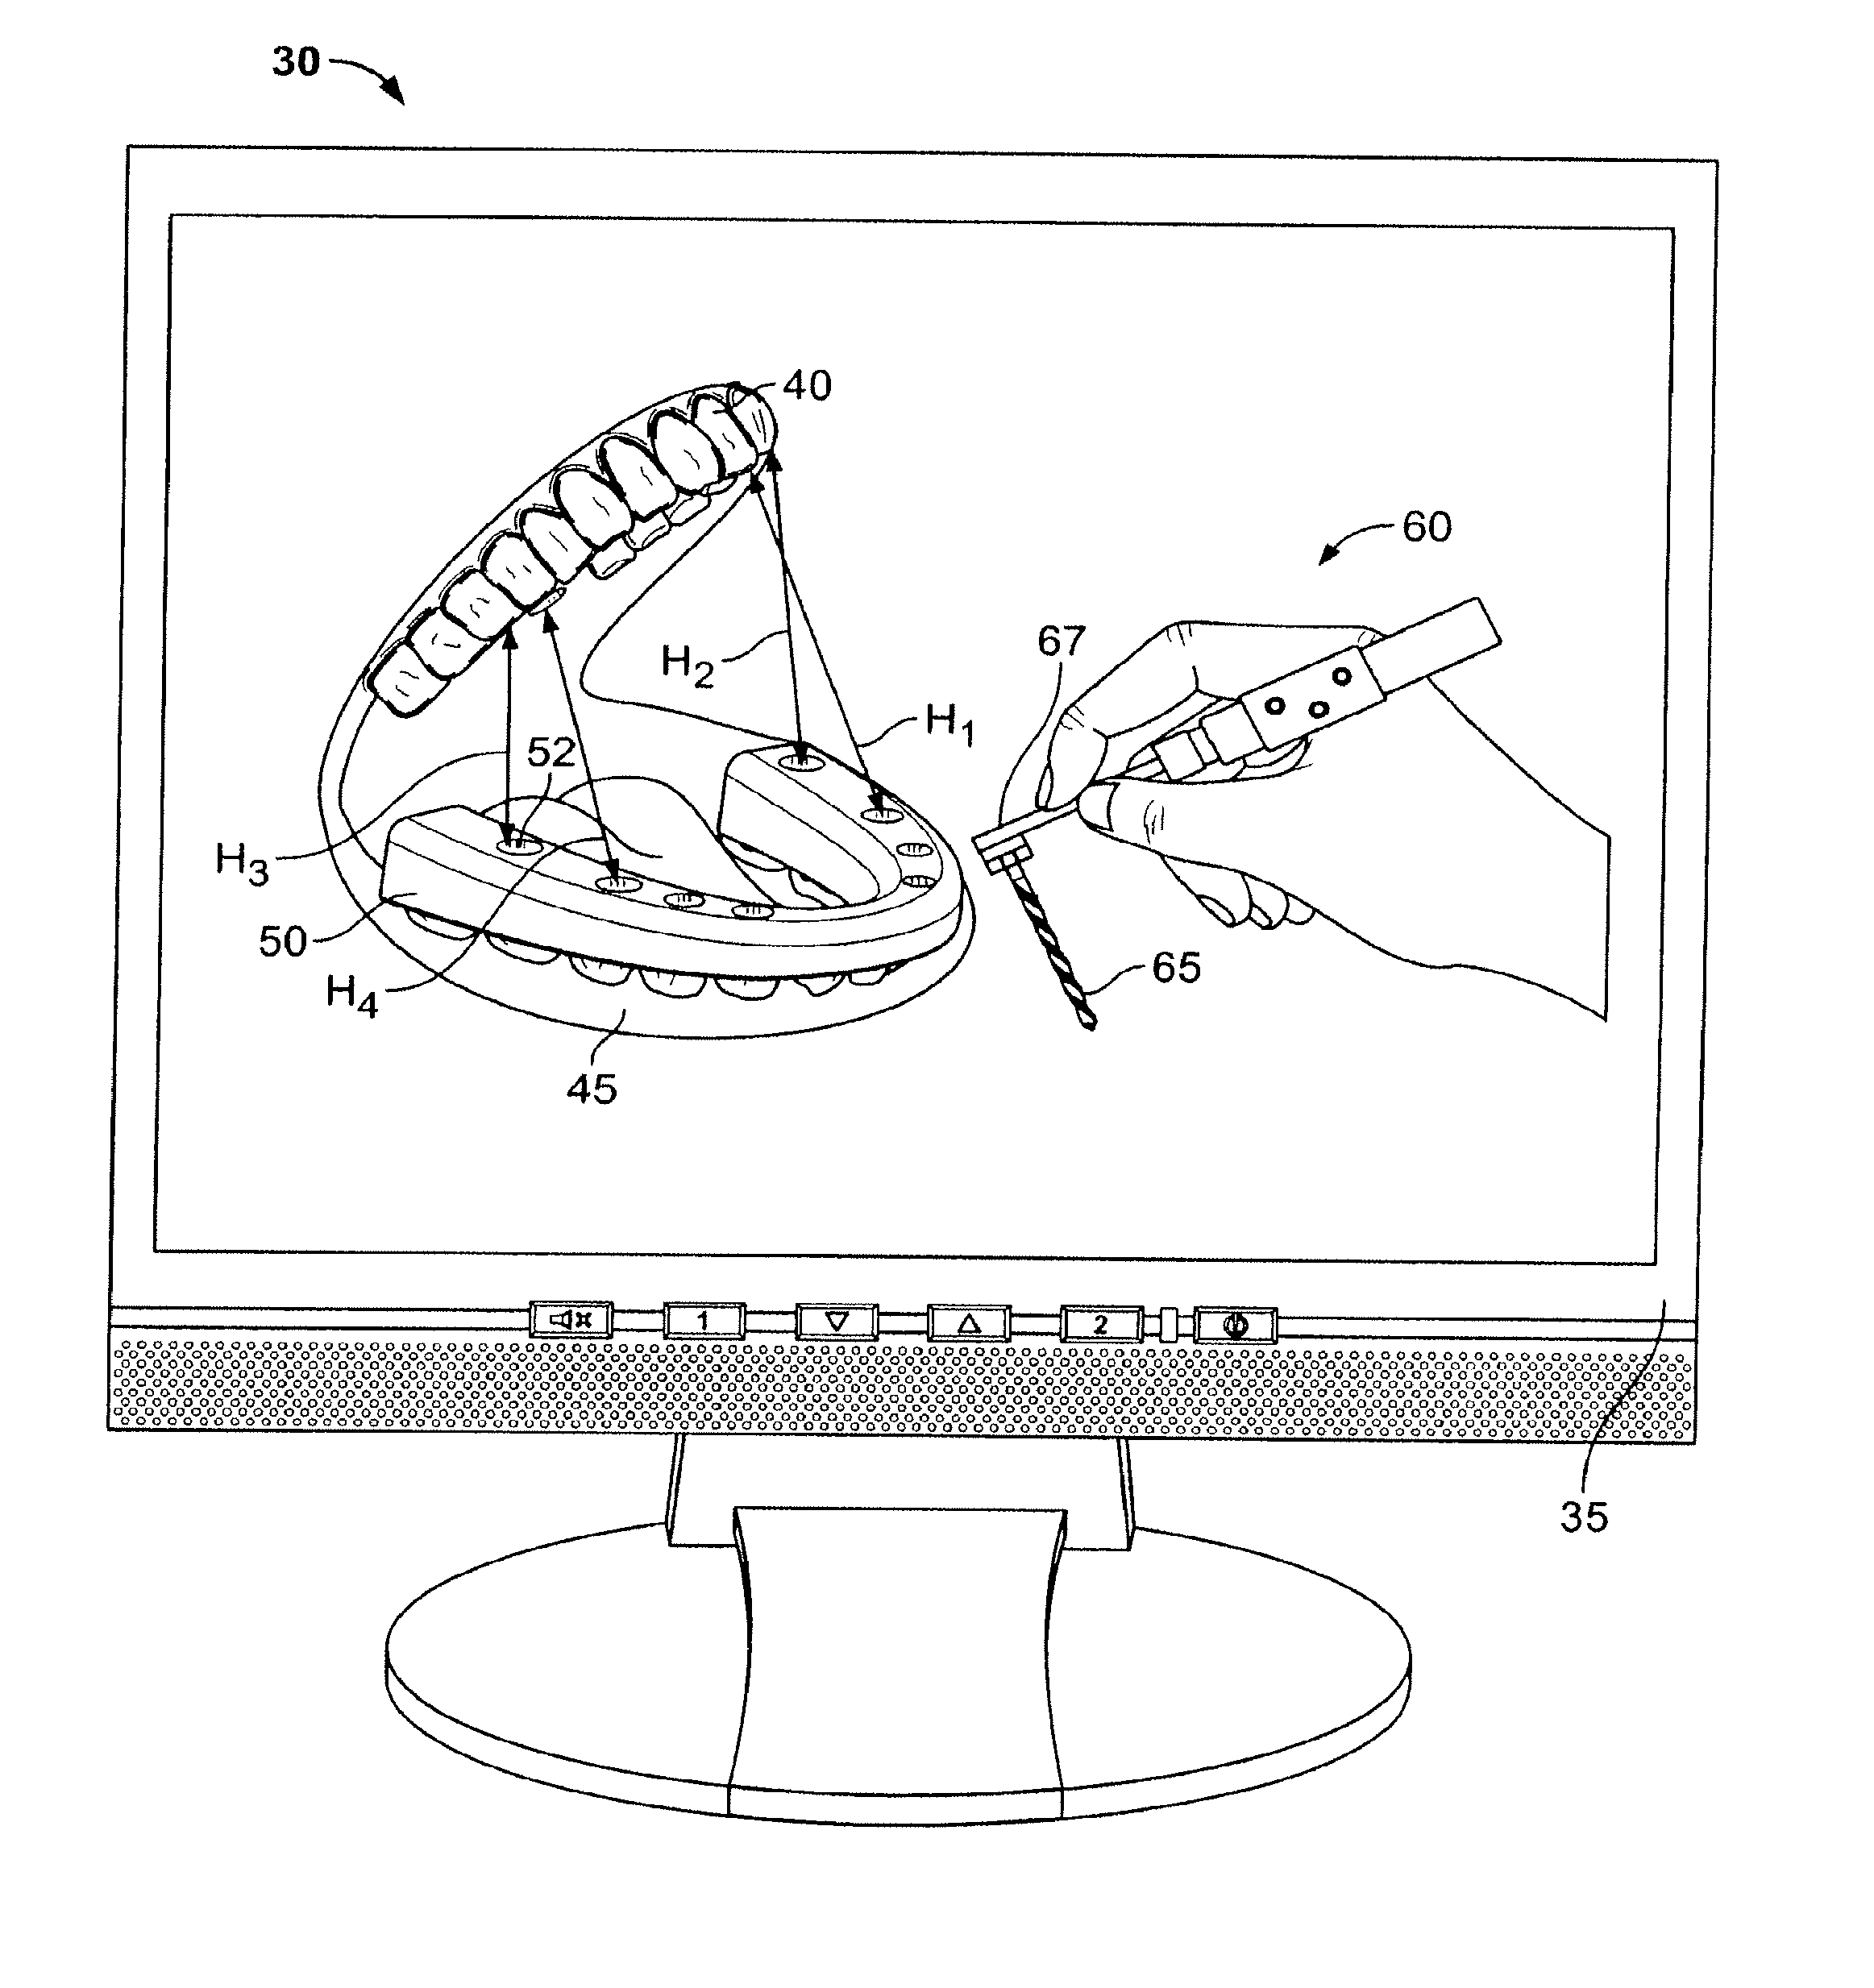 Method For Pre-Operative Visualization Of Instrumentation Used With A Surgical Guide For Dental Implant Placement